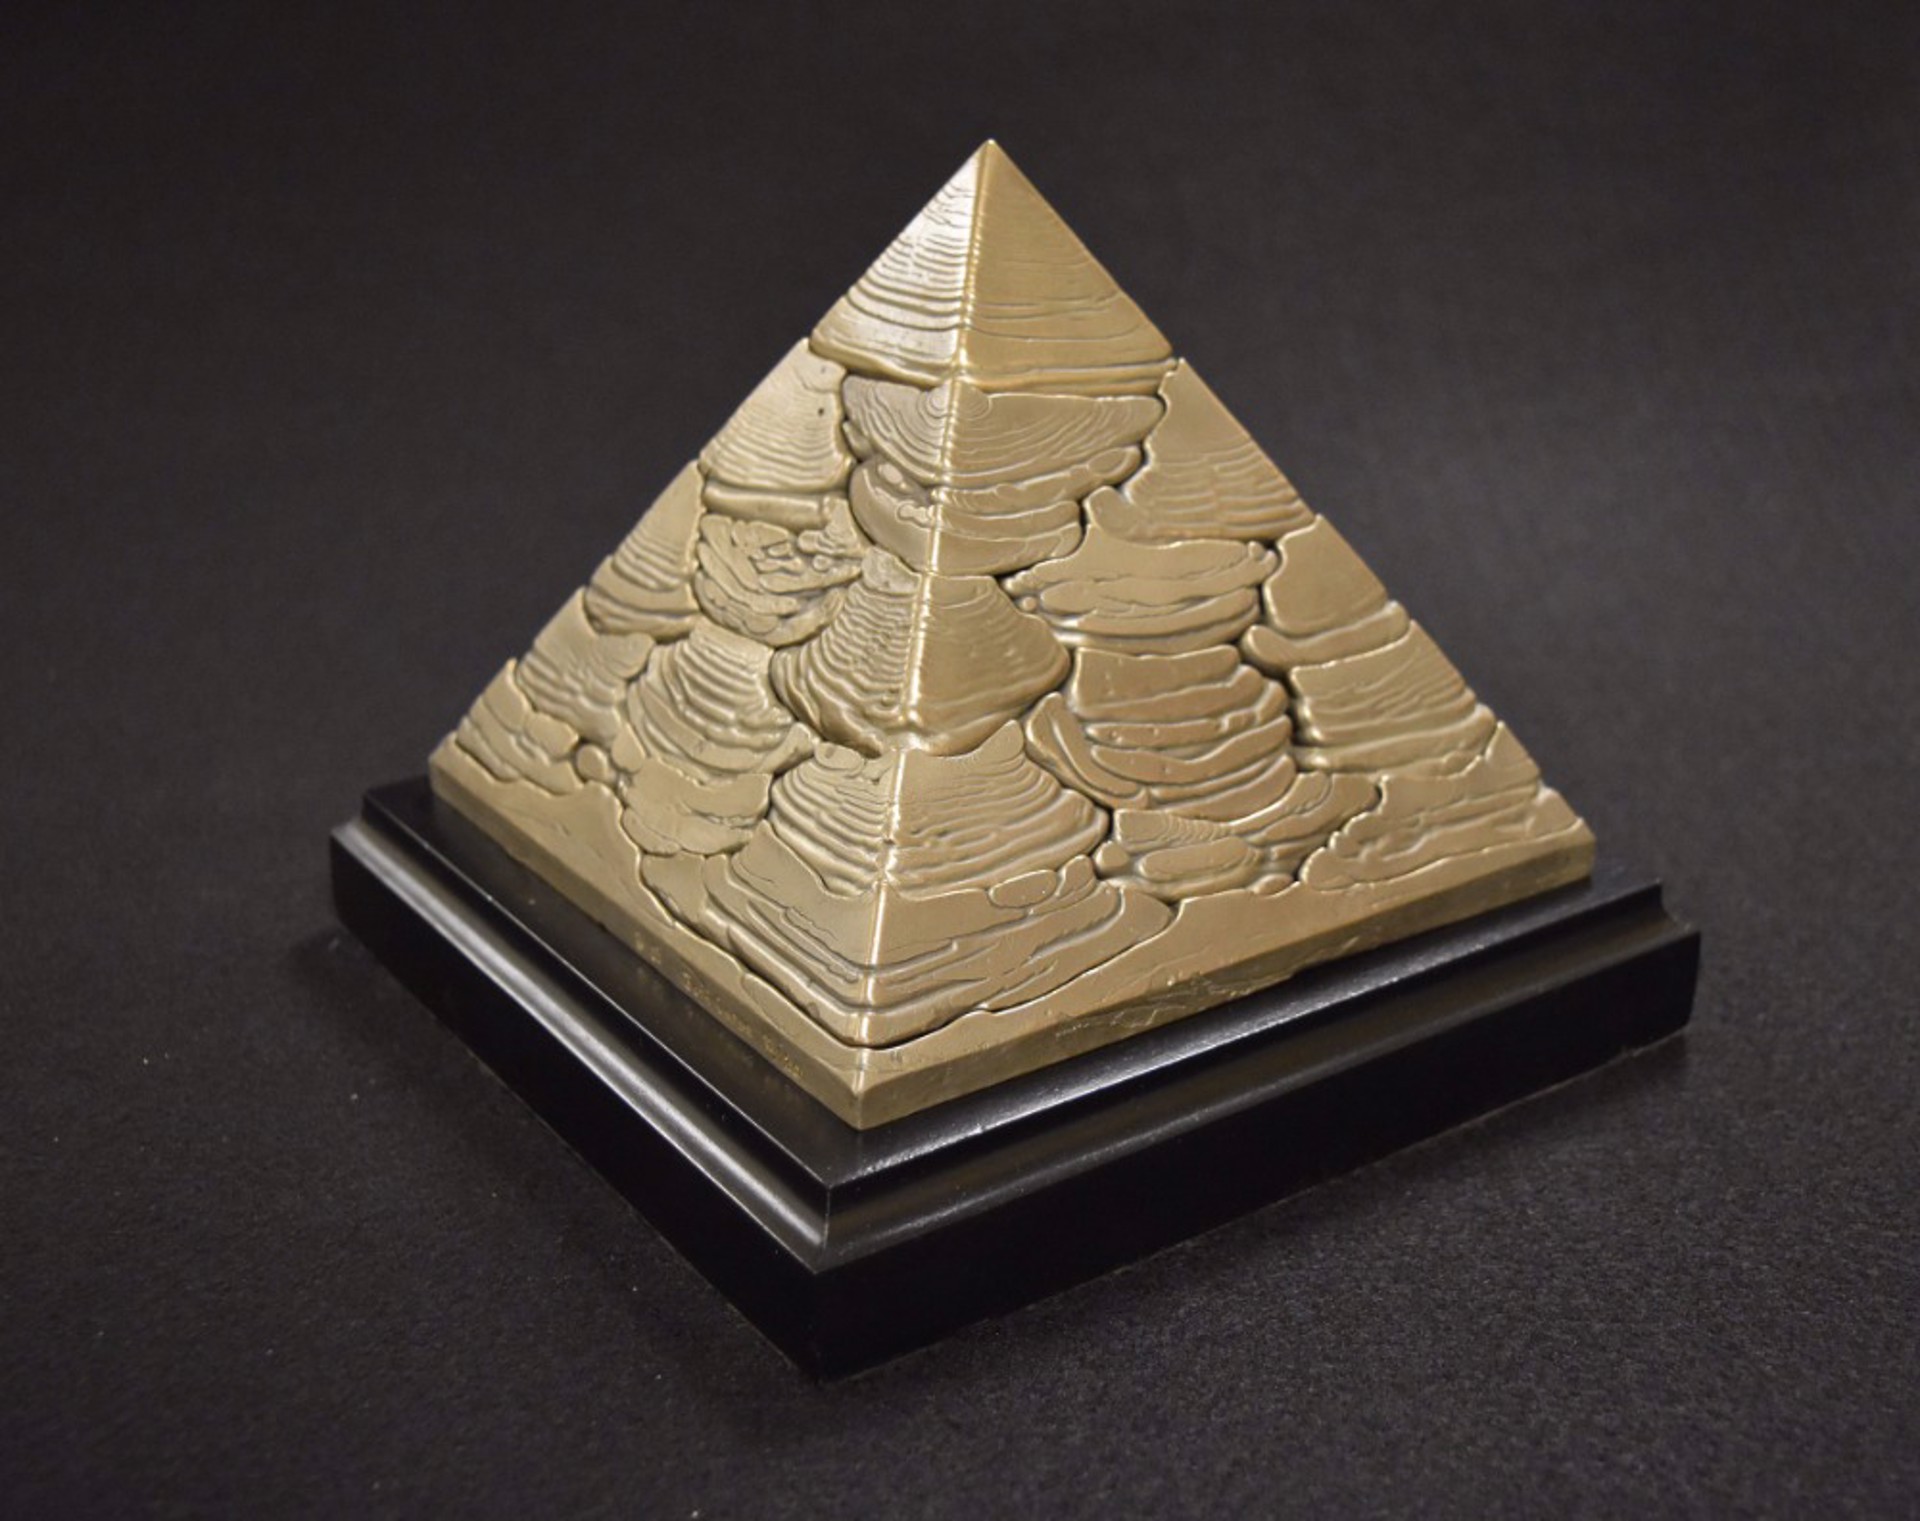 Pyramid Puzzle (Large) by Jeff Caron